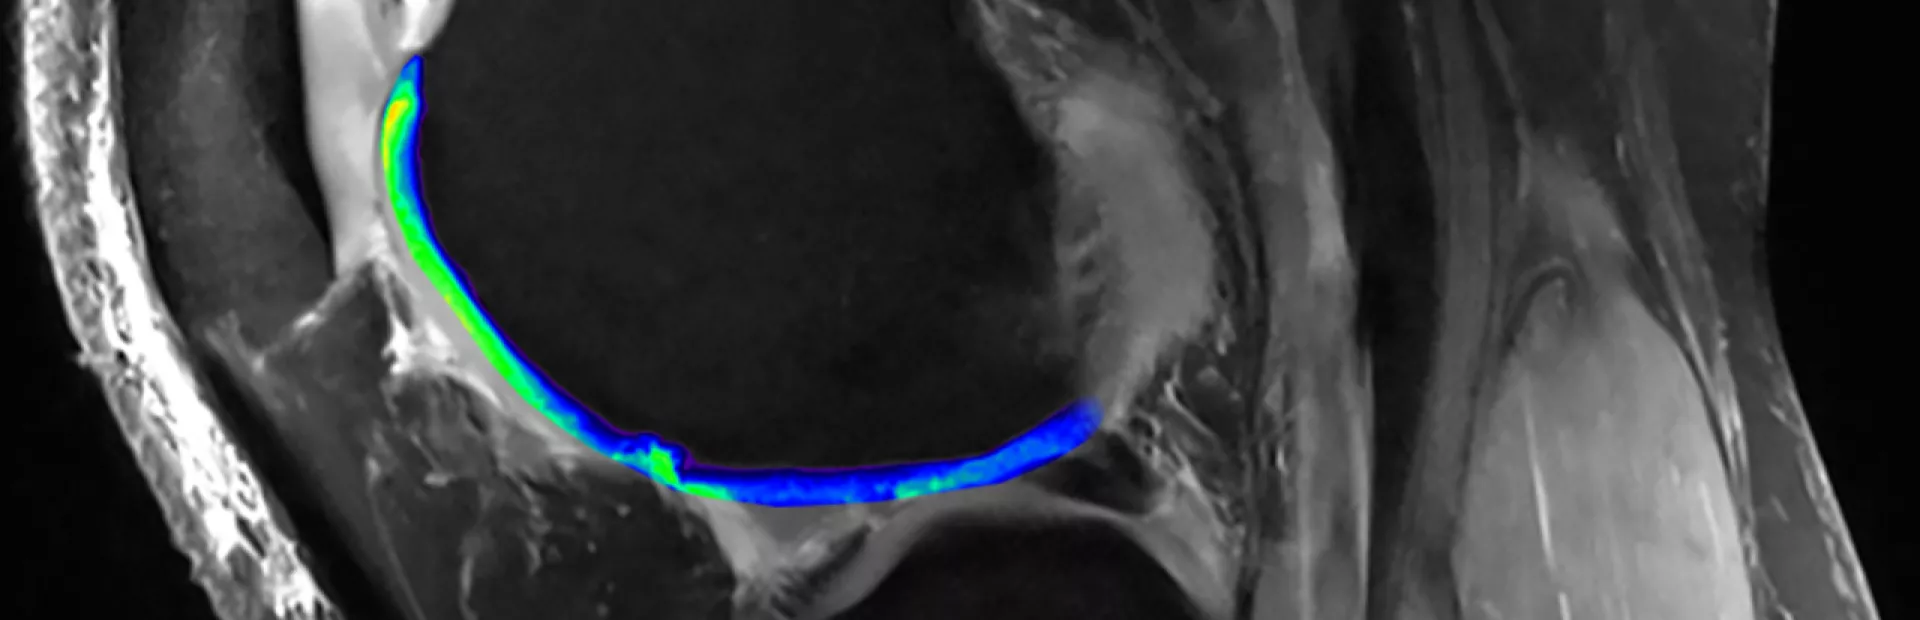 MRI technology reveals cartilage in knees